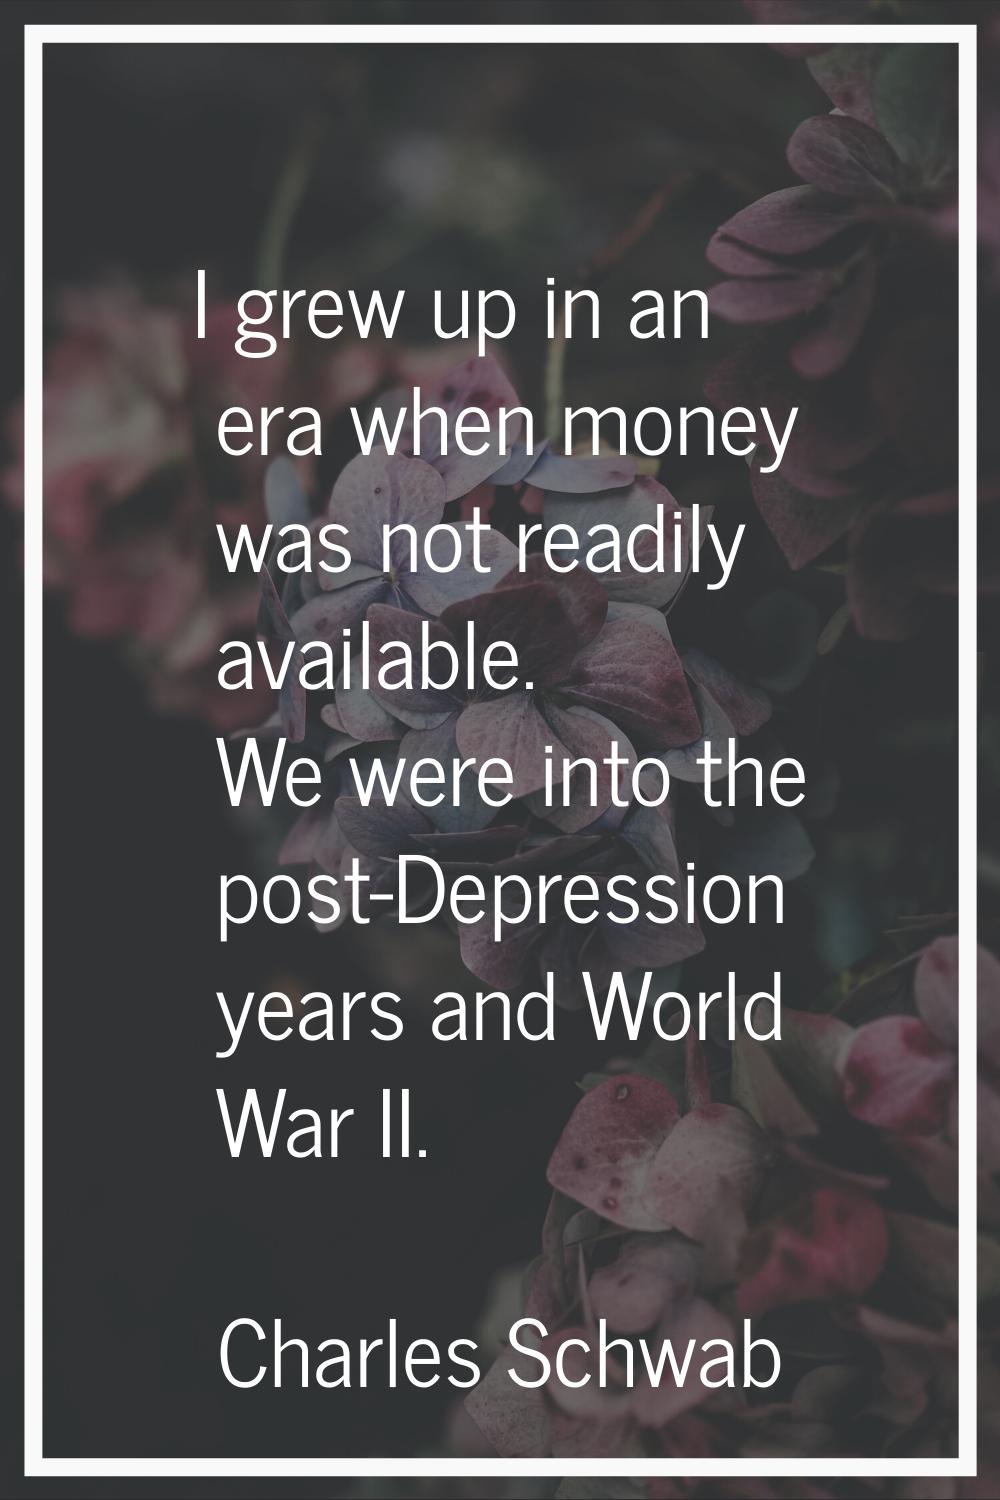 I grew up in an era when money was not readily available. We were into the post-Depression years an